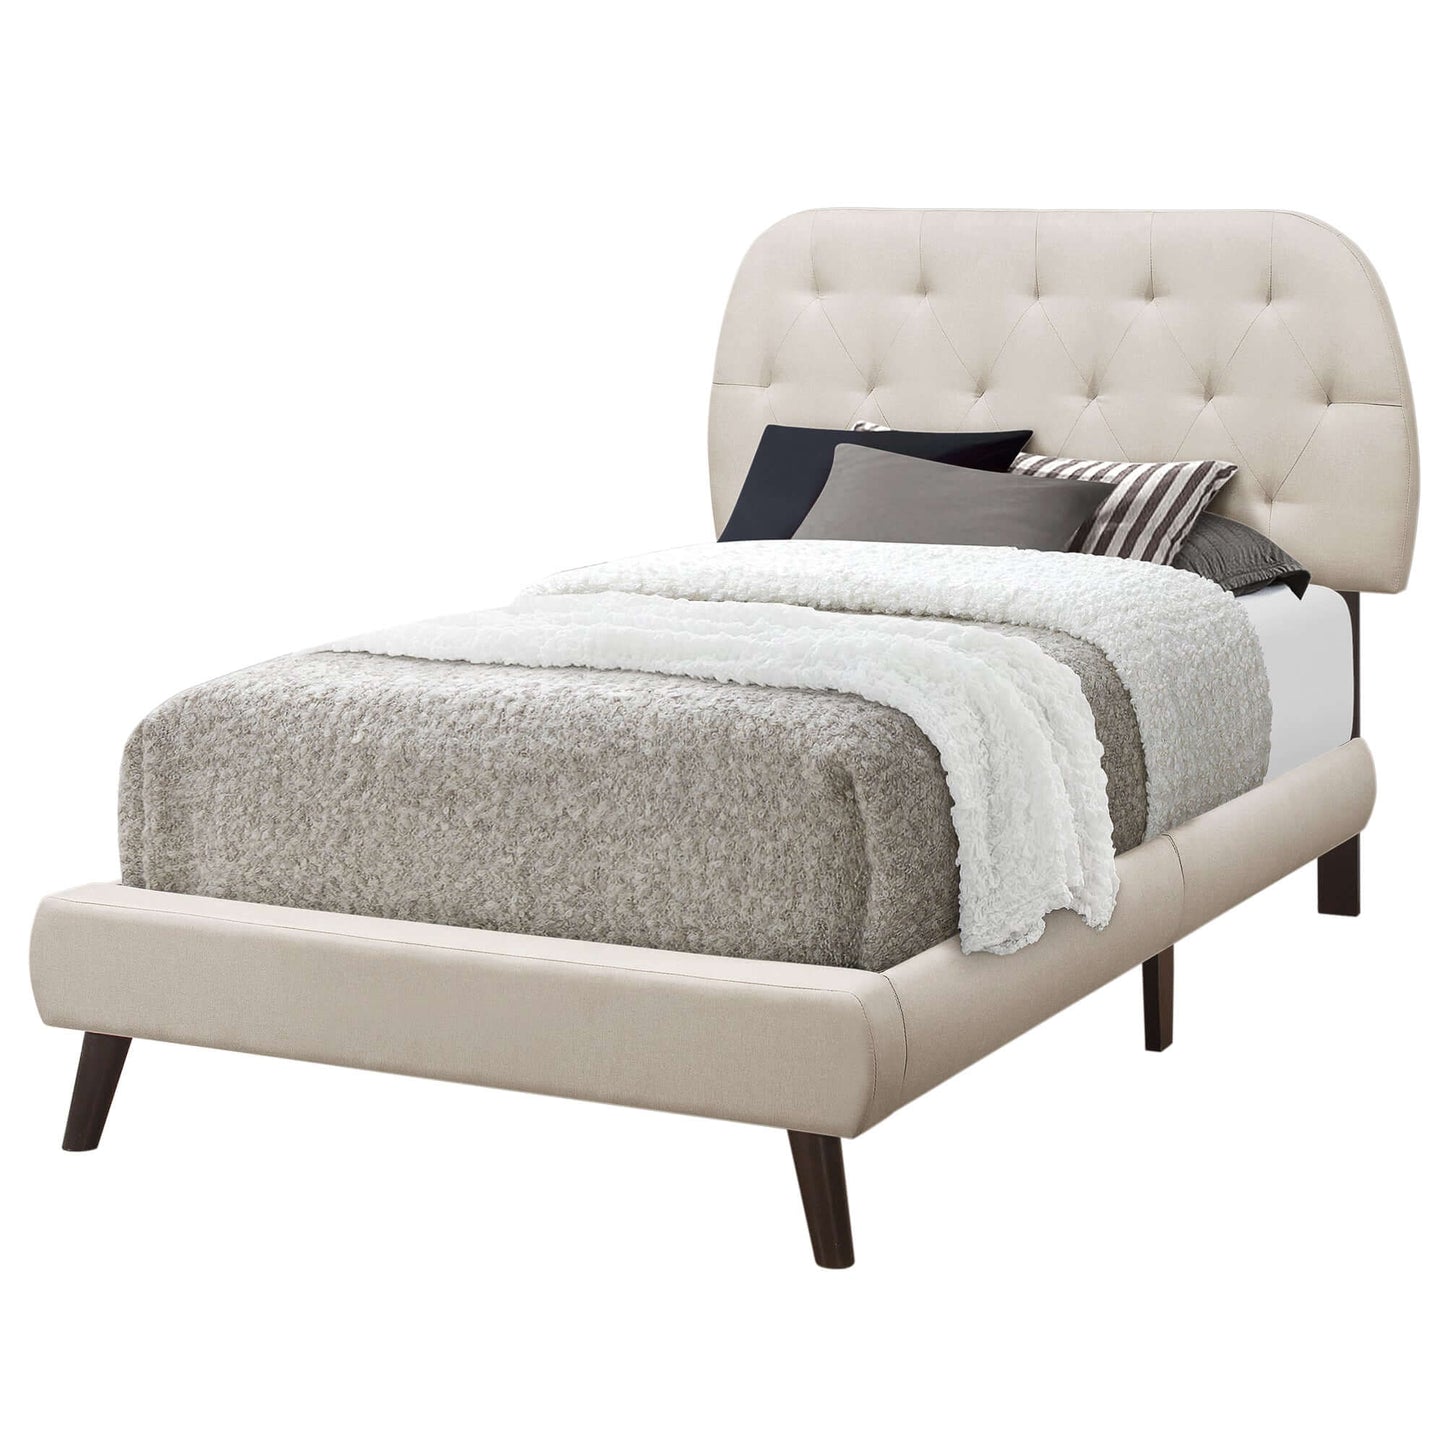 Transitional Twin Size Bed in Beige Linen Fabric with Black Wood Legs